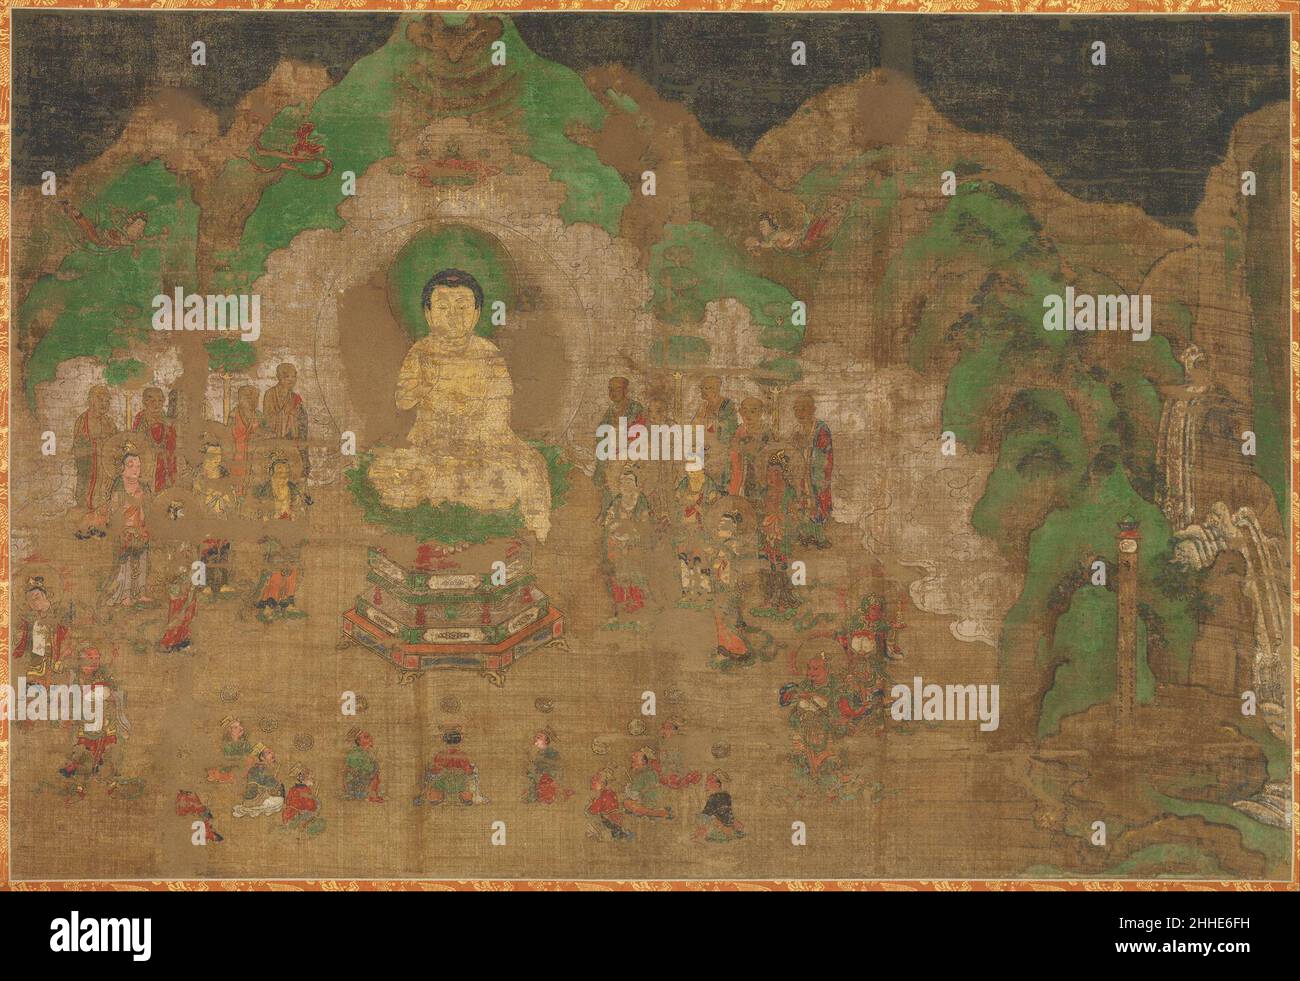 Life of the Buddha: King Bimbisara's Conversion early 15th century Japan After Shakyamuni, the historical Buddha, was enlightened, he became a wandering teacher, delivering the message that life is suffering from which one can be released through spiritual cultivation and compassionate behavior toward all living things. This painting, from a set of eight depicting milestones in the life of the Buddha, illustrates the conversion of King Bimbisara at Vulture Peak. The Buddha is shown in deified form seated on a lotus pedestal, with his right hand raised in the gesture that indicates teaching. Th Stock Photo